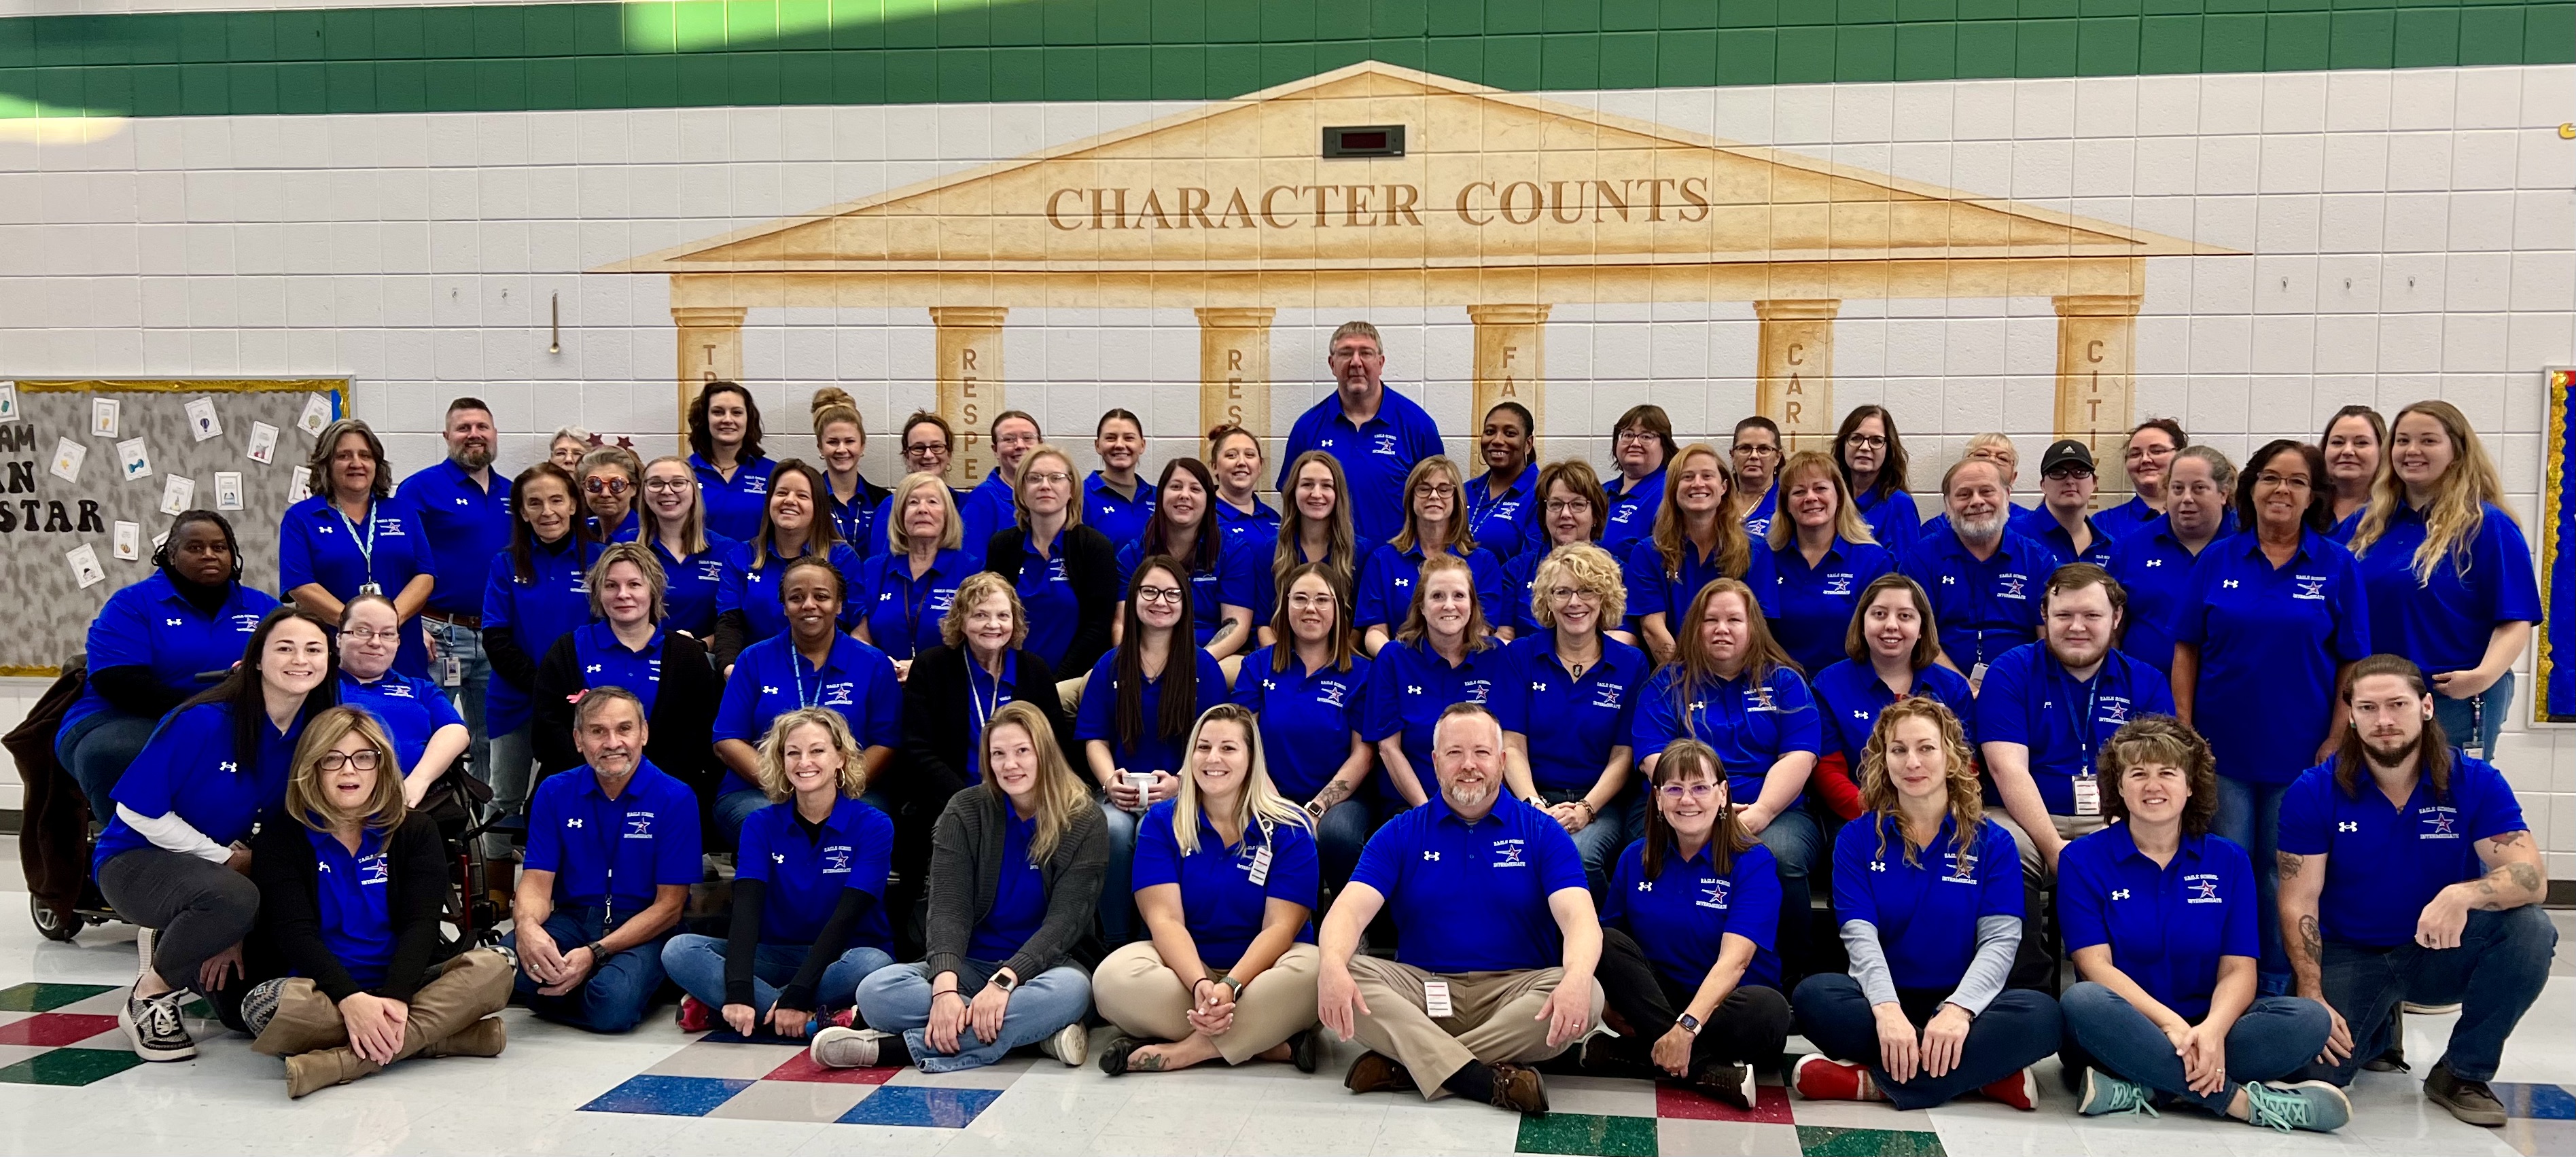 Image shows all of Eagle School Intermediate's staff coming together to stand for an official faculty photo. 